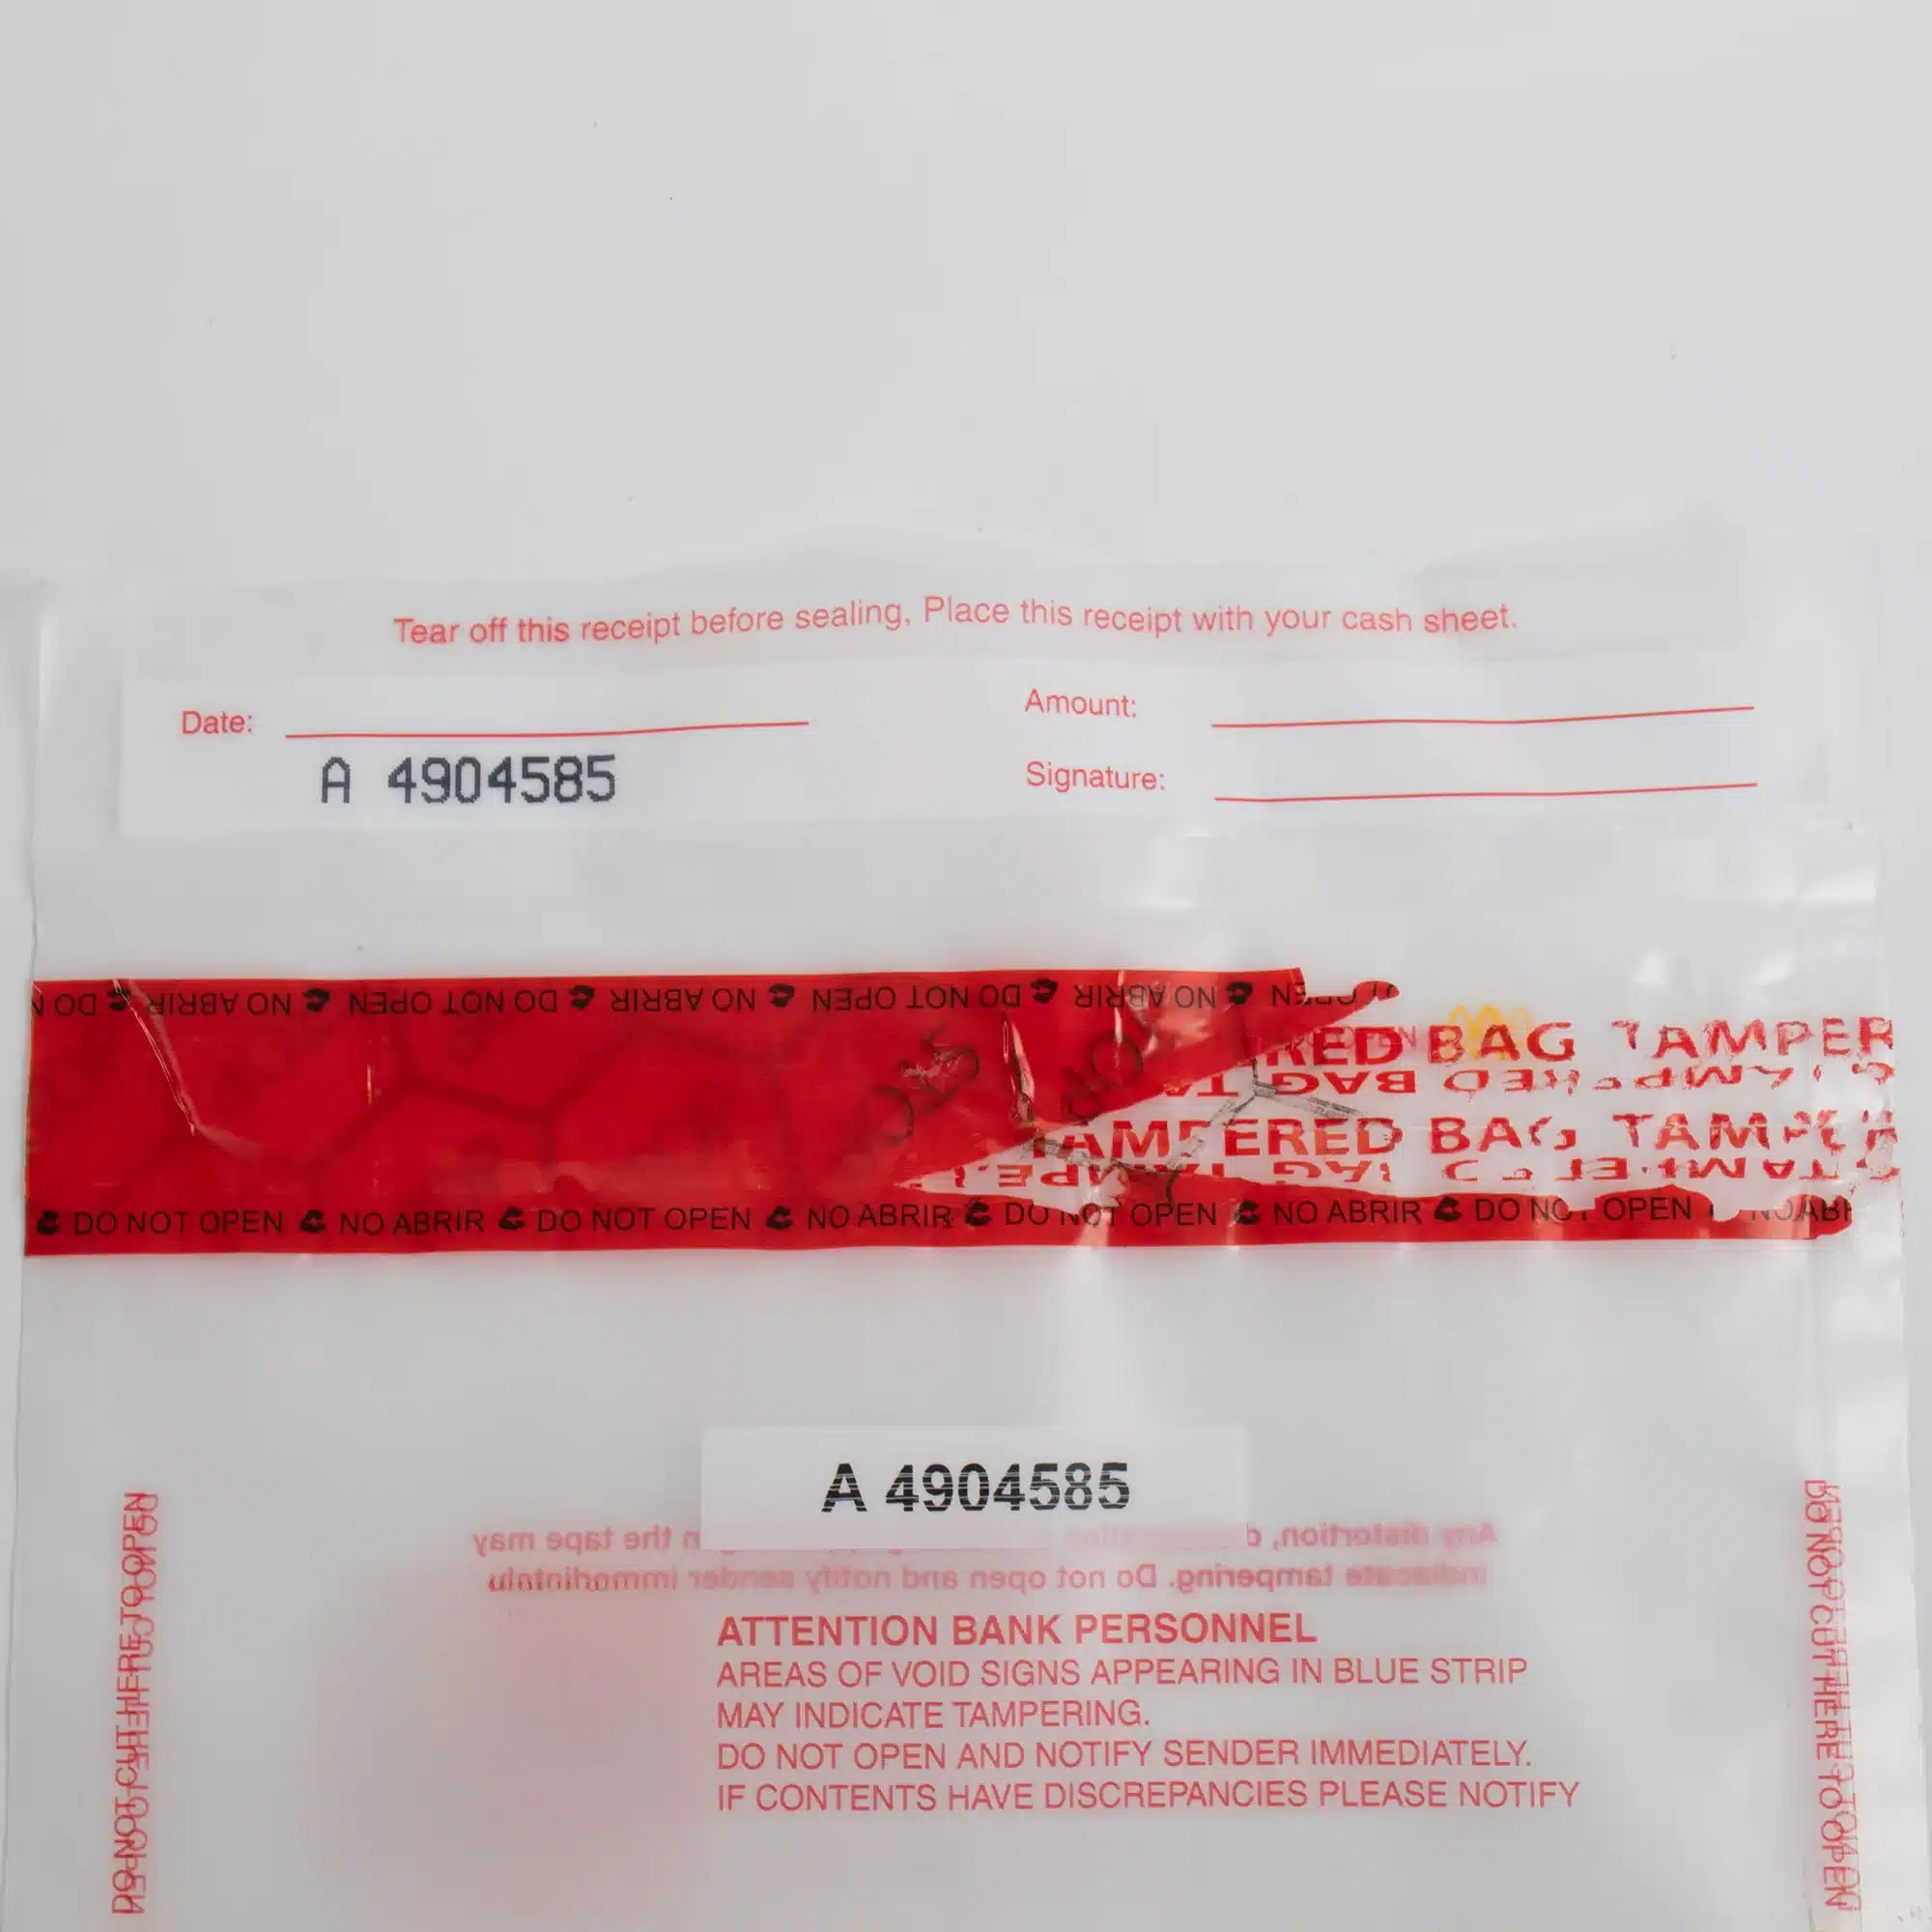 Tamper Evident Security Bag Tape with Security Cuts Showing Void Message from Tampertech